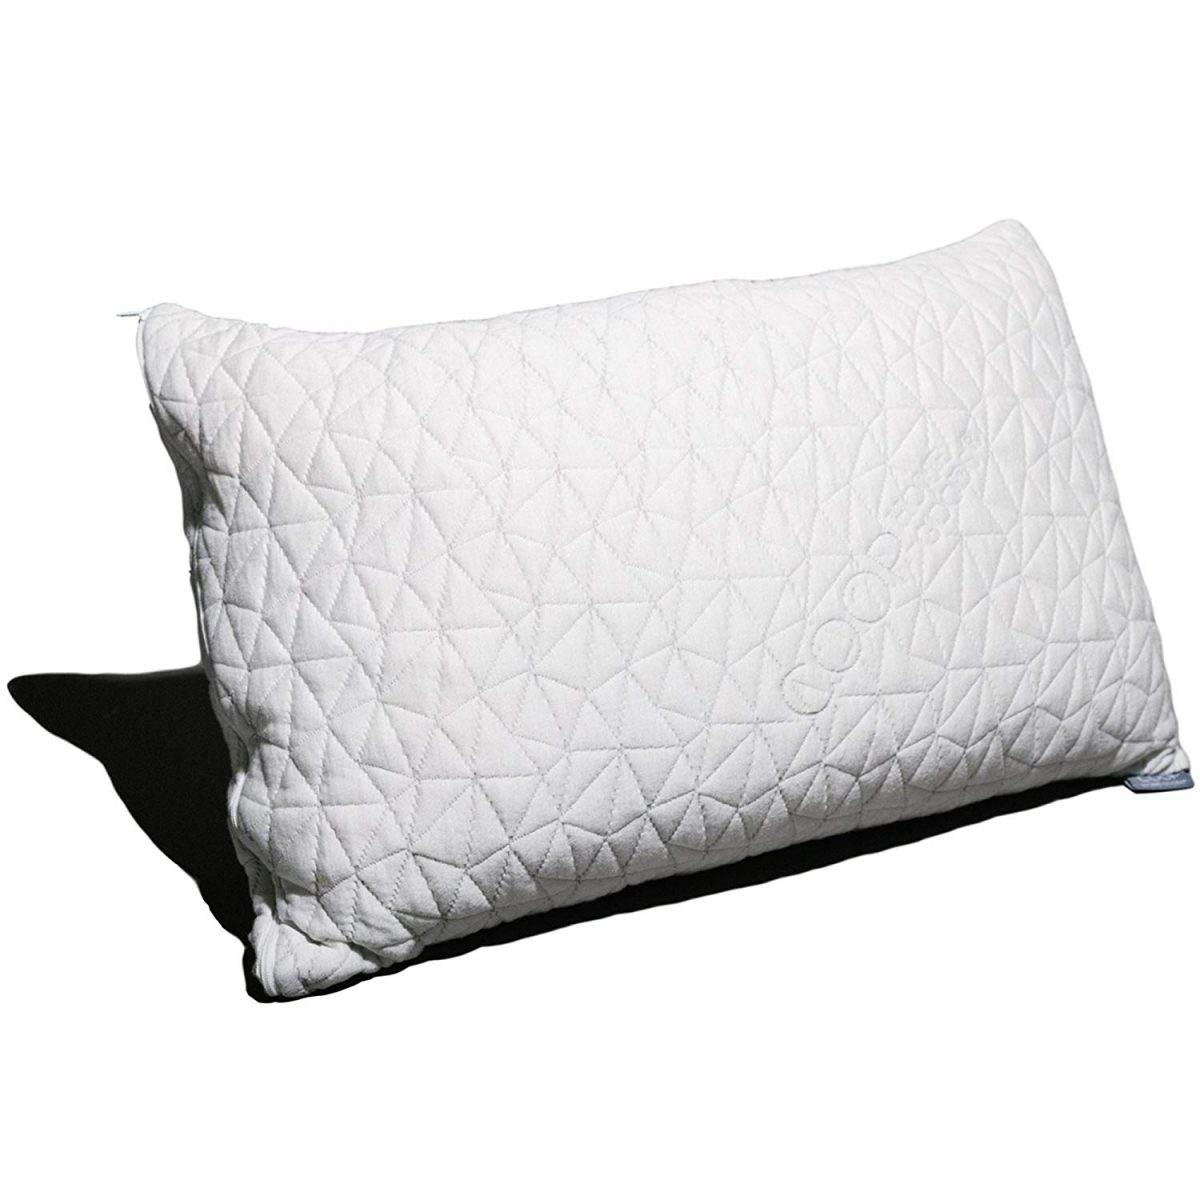 Father's Day Gift Guide: Coop Home Goods the Original Pillow